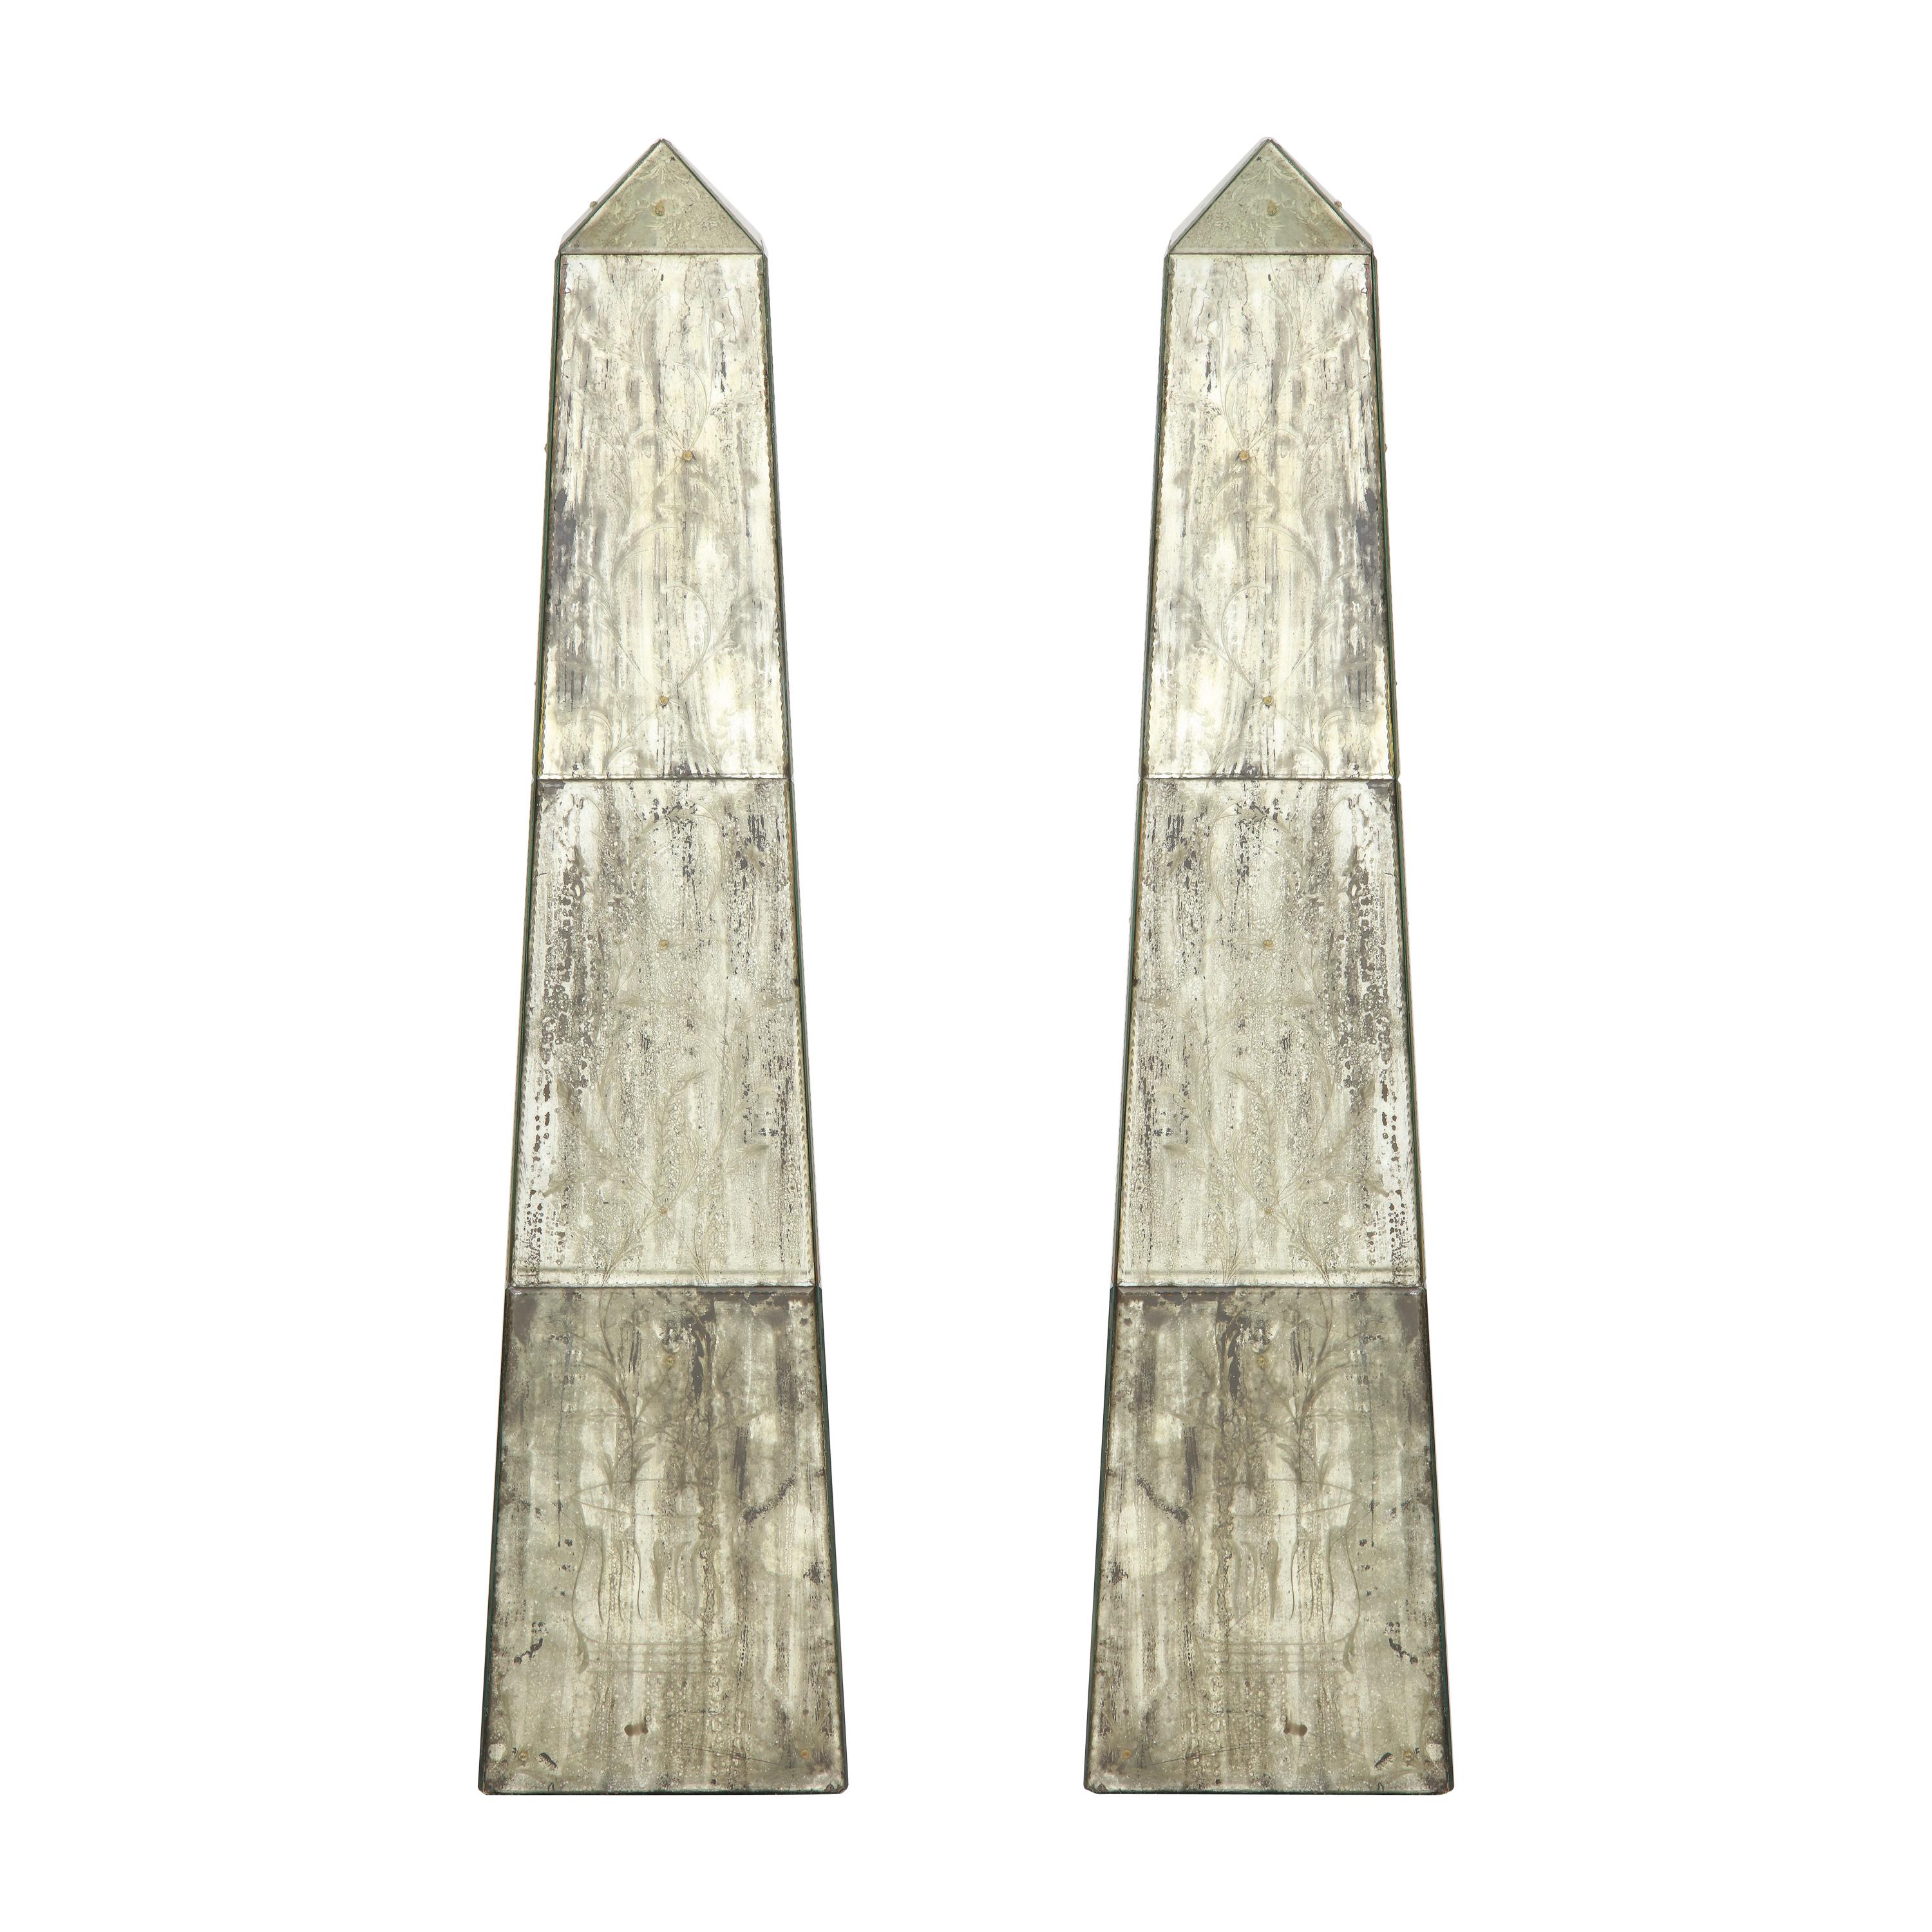 Pair of Tall Mirrored Obelisks with Etched Floral Design